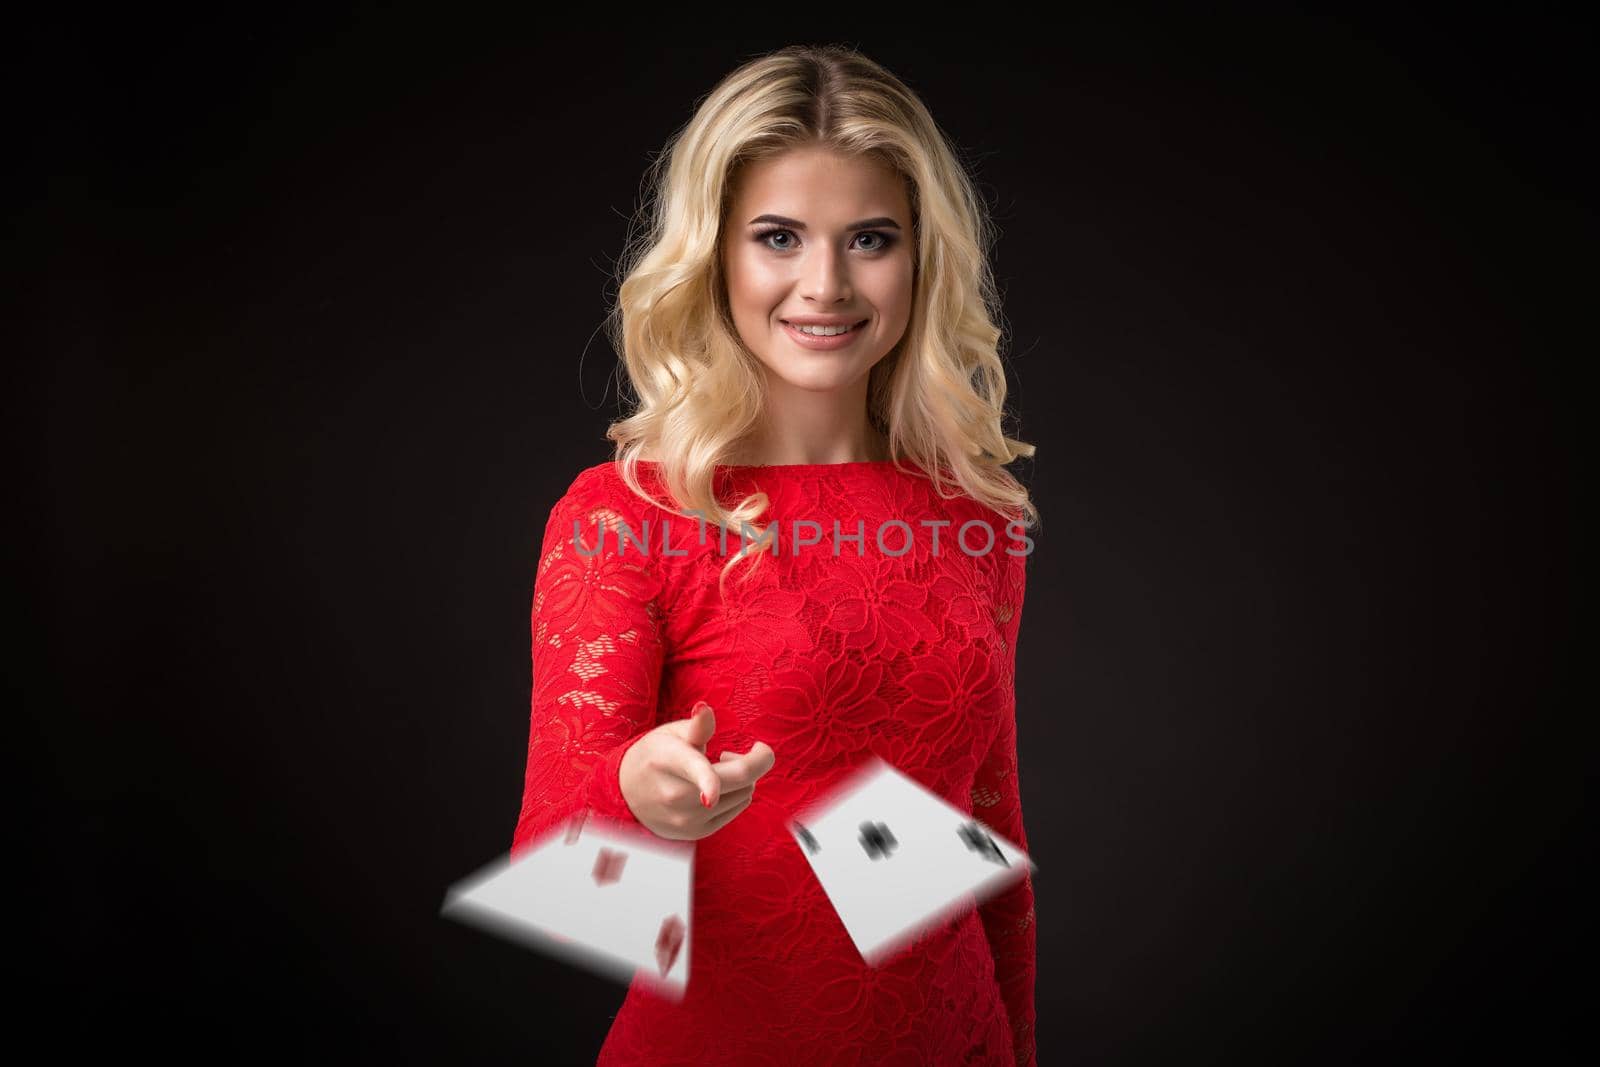 Young beautiful emotional woman throws two aces cards on a black background in the studio. Portrait of a beautiful blonde in a red dress. Poker